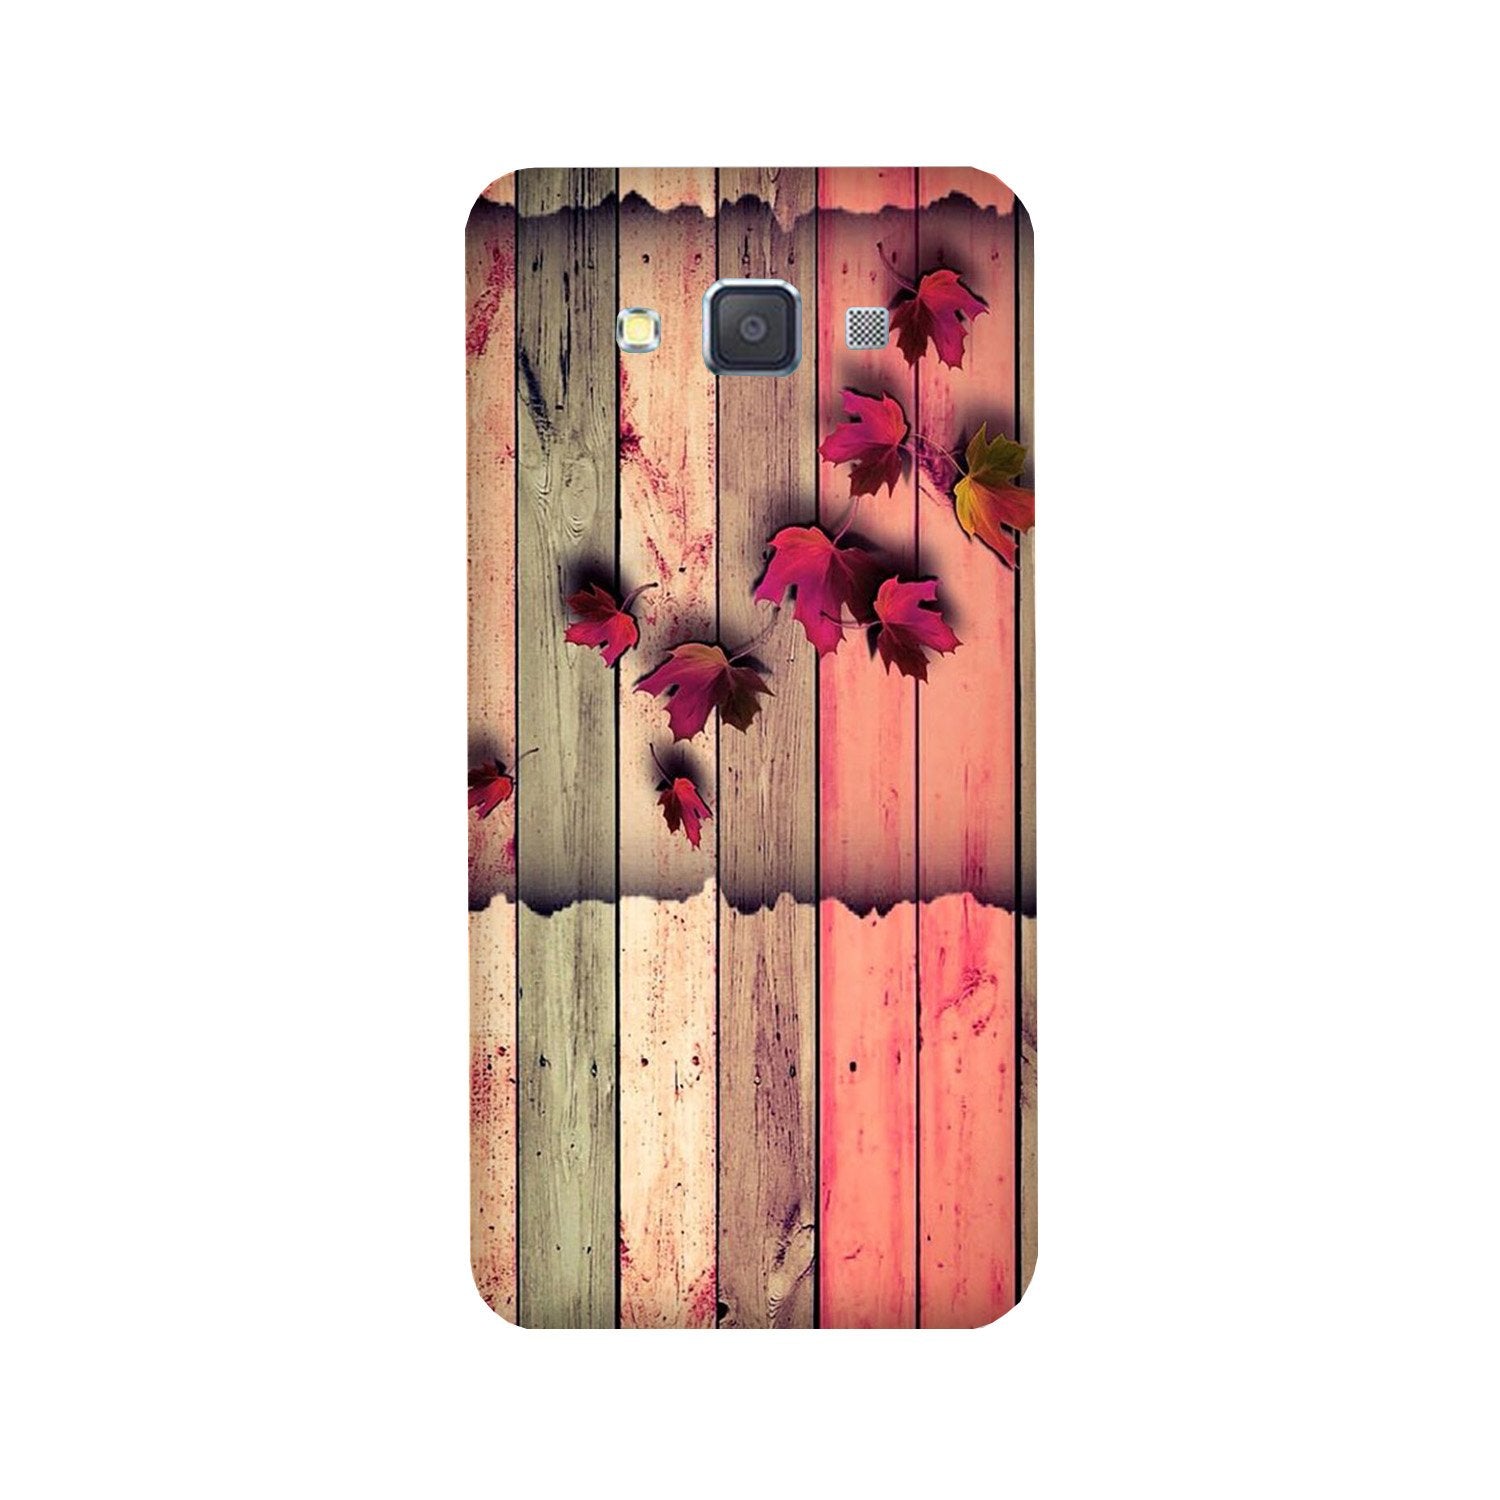 Wooden look2 Case for Galaxy J7 (2016)